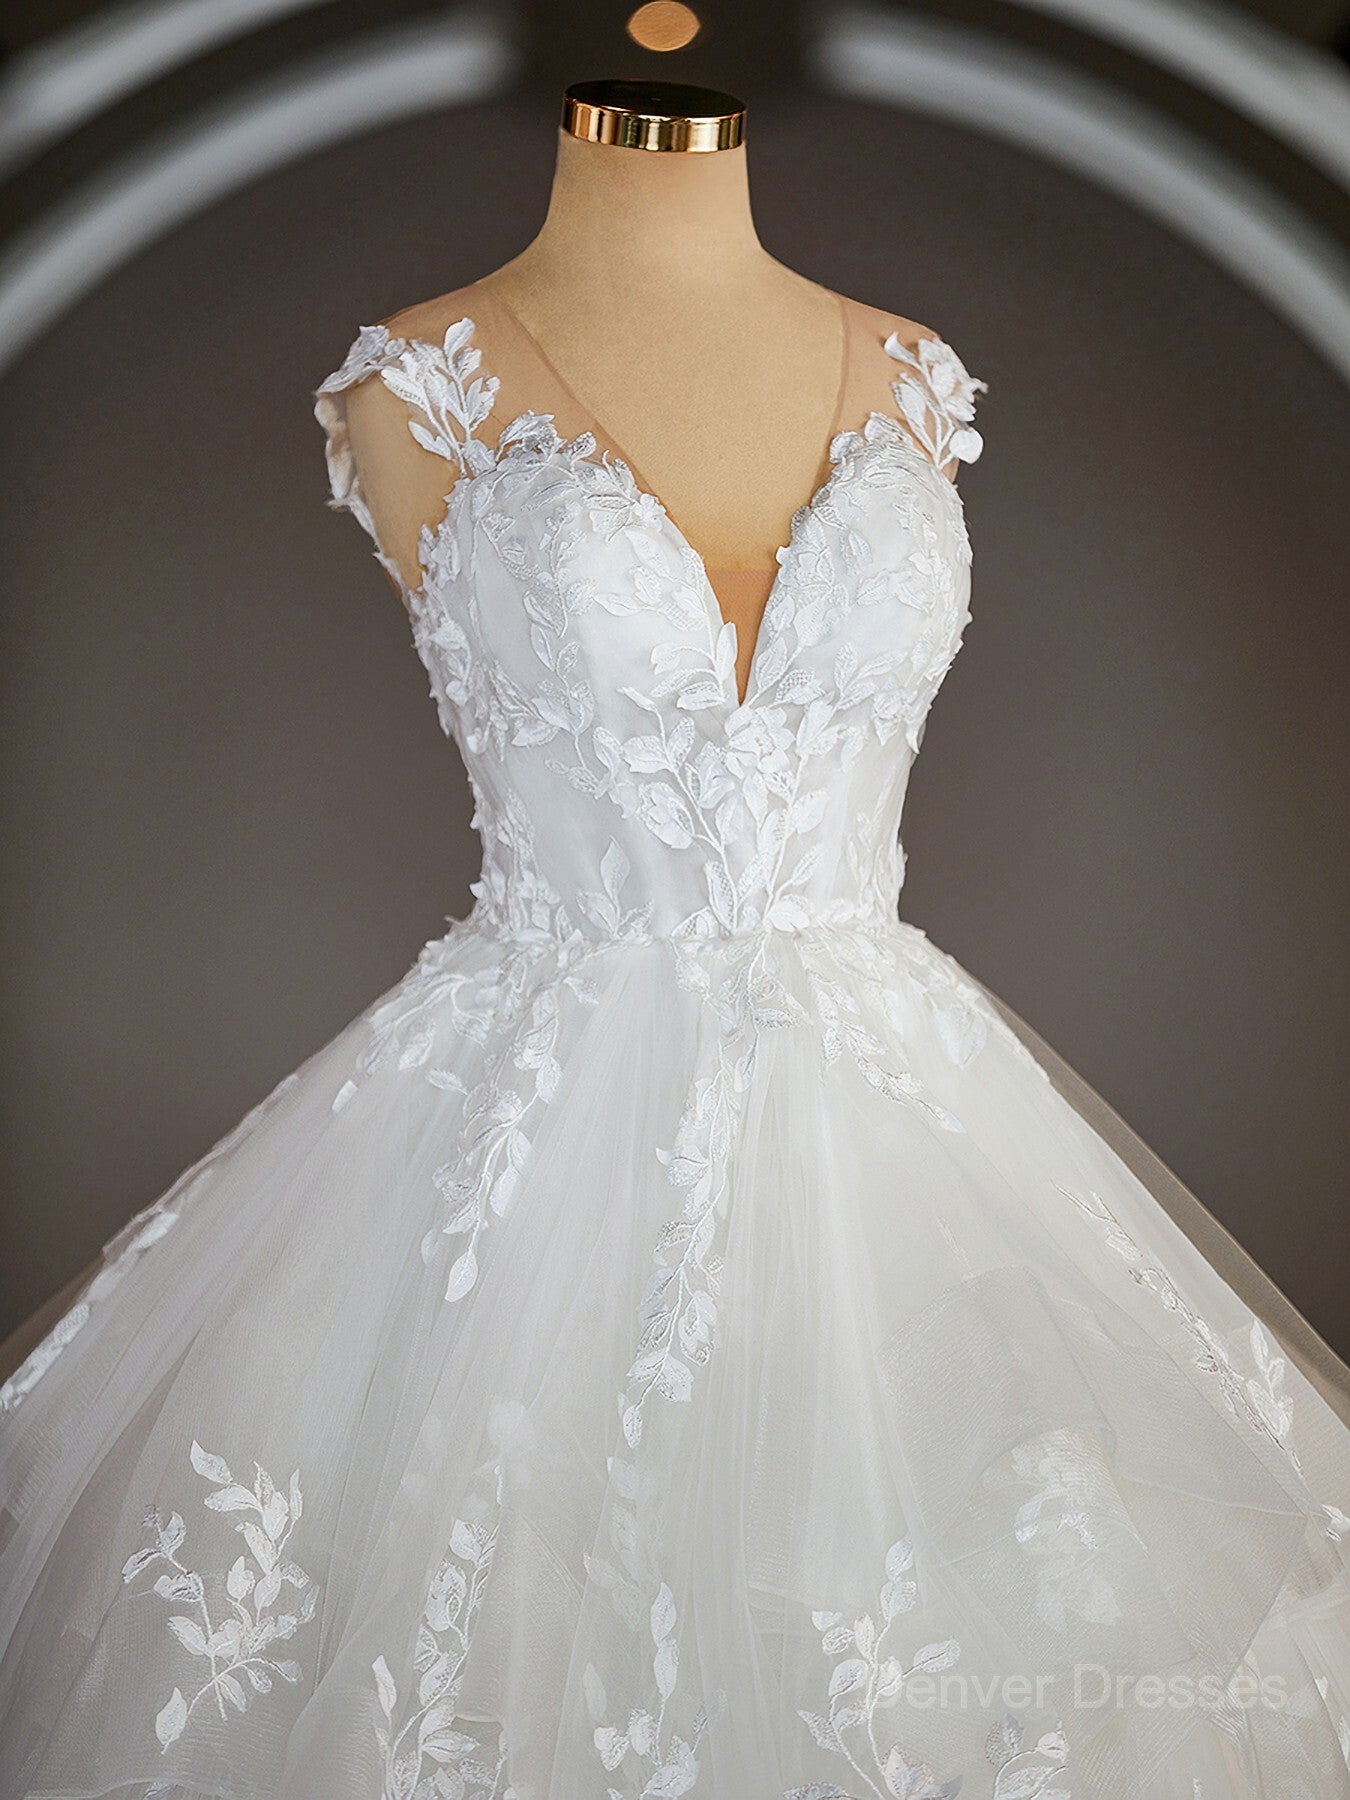 Wedding Dresses Satin, Ball-Gown V-neck Court Train Tulle Wedding Dresses with Appliques Lace